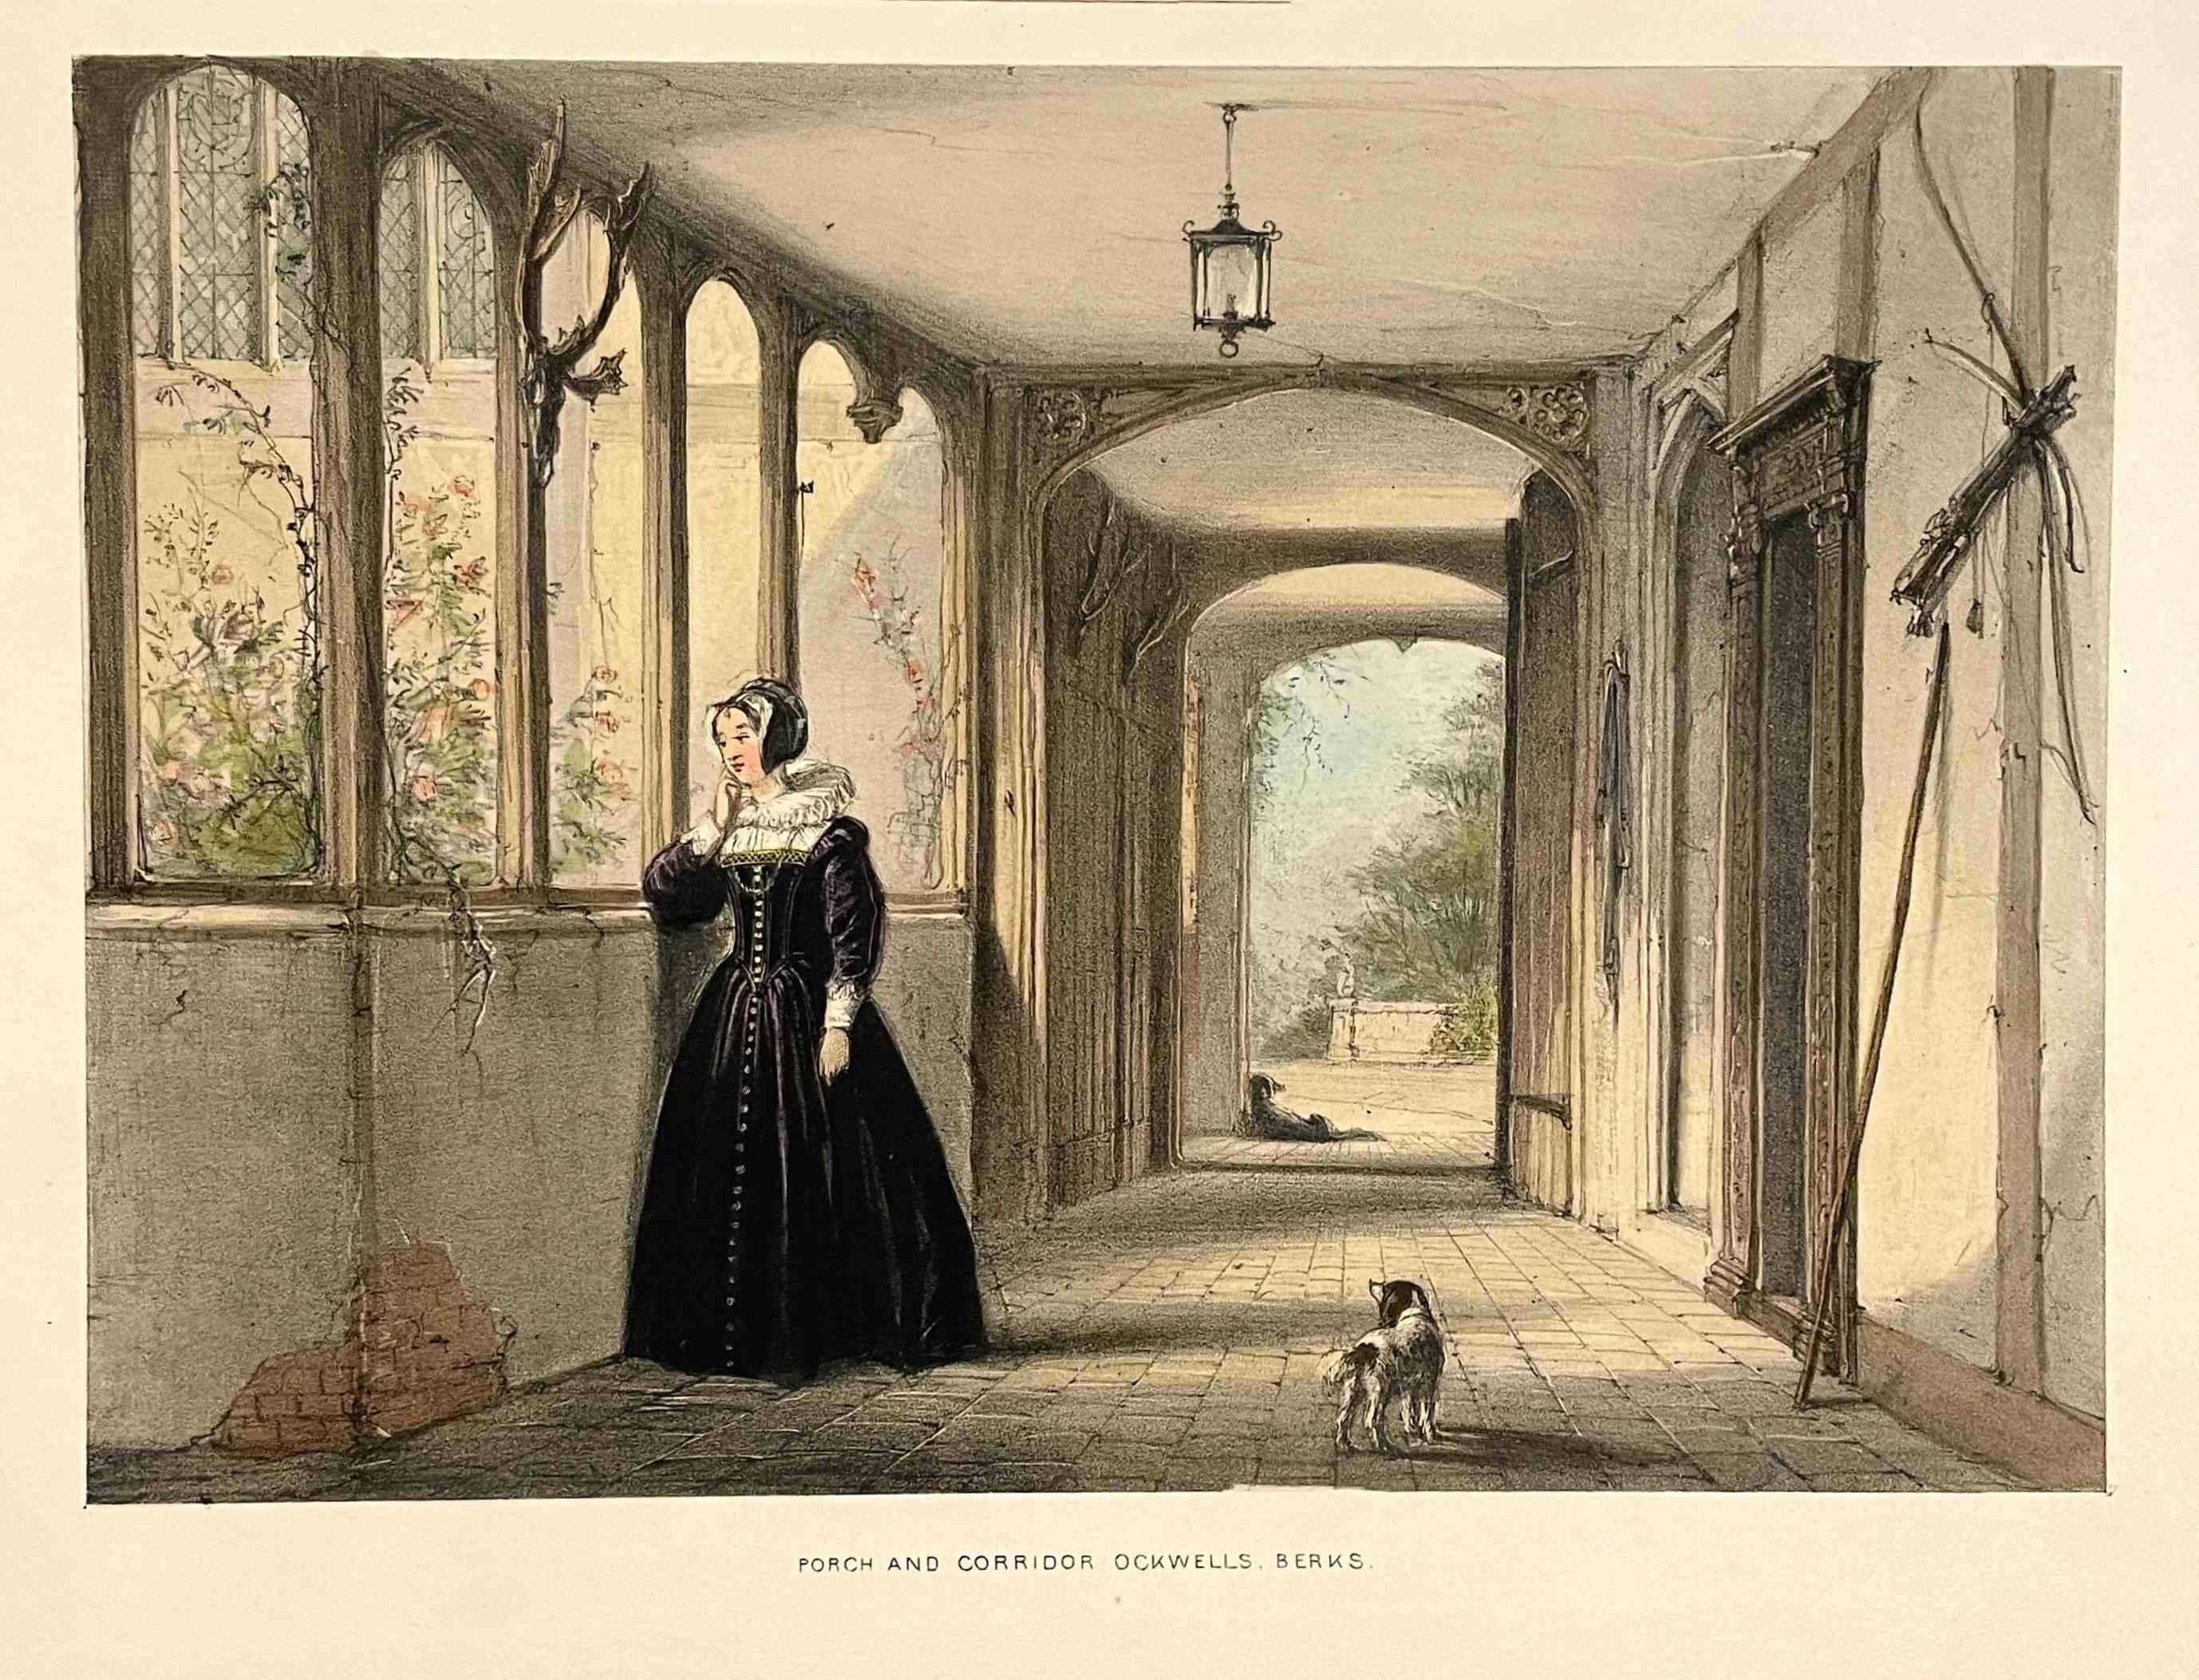 Joseph Nash Interior Print - Porch and Corridor, Ockwells, Berks. from "The Mansions of England in the Olden 